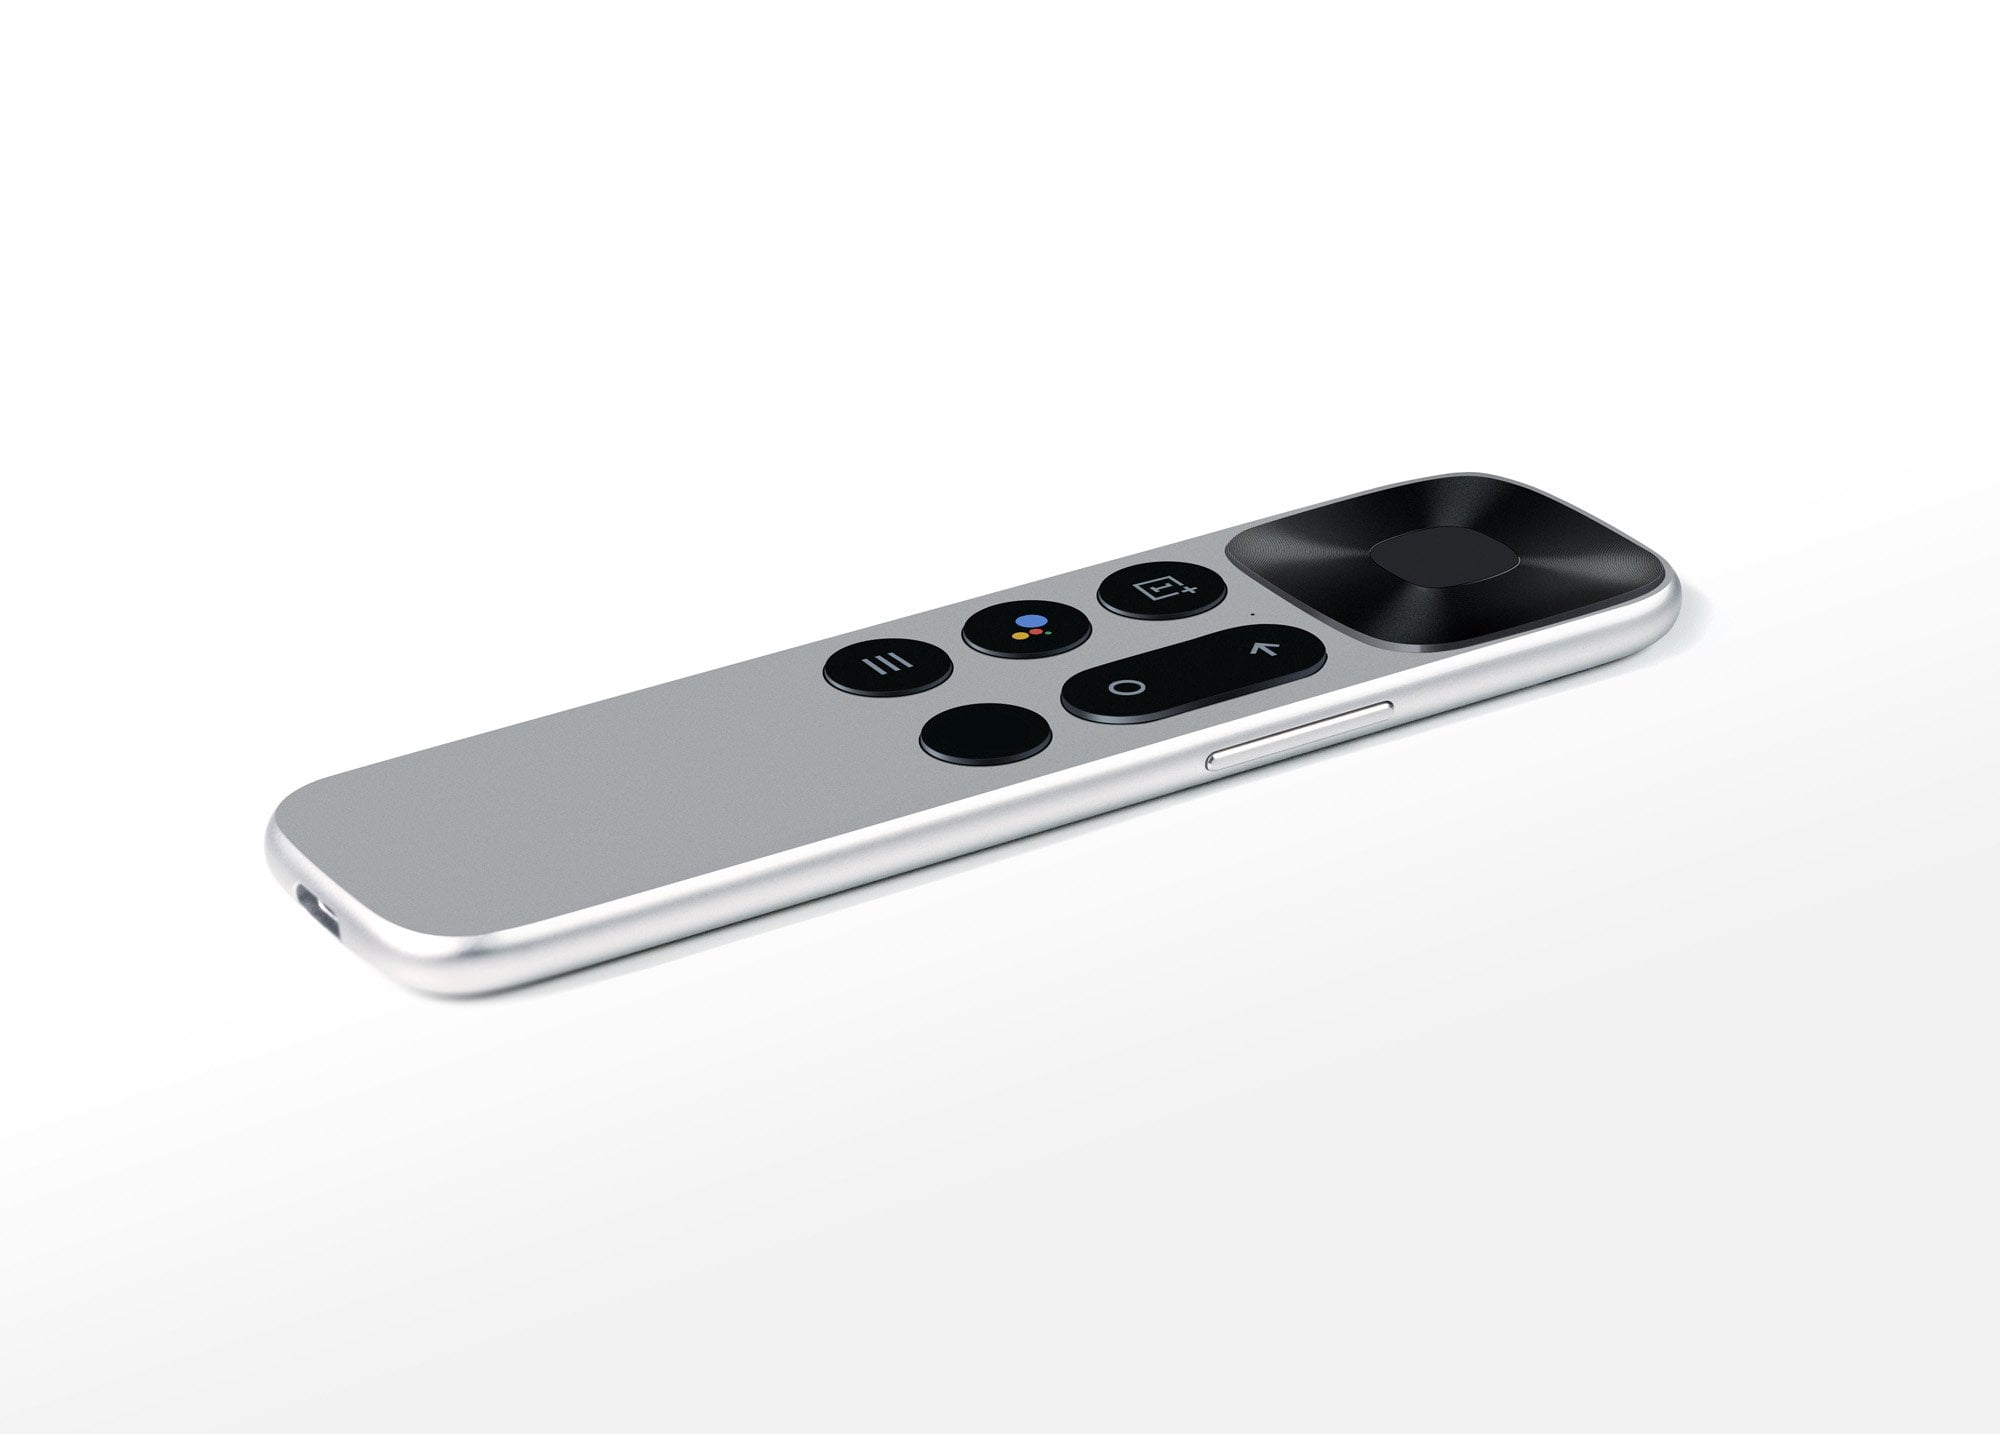 OnePlus CEO Shared Image Of OnePlus TV Remote